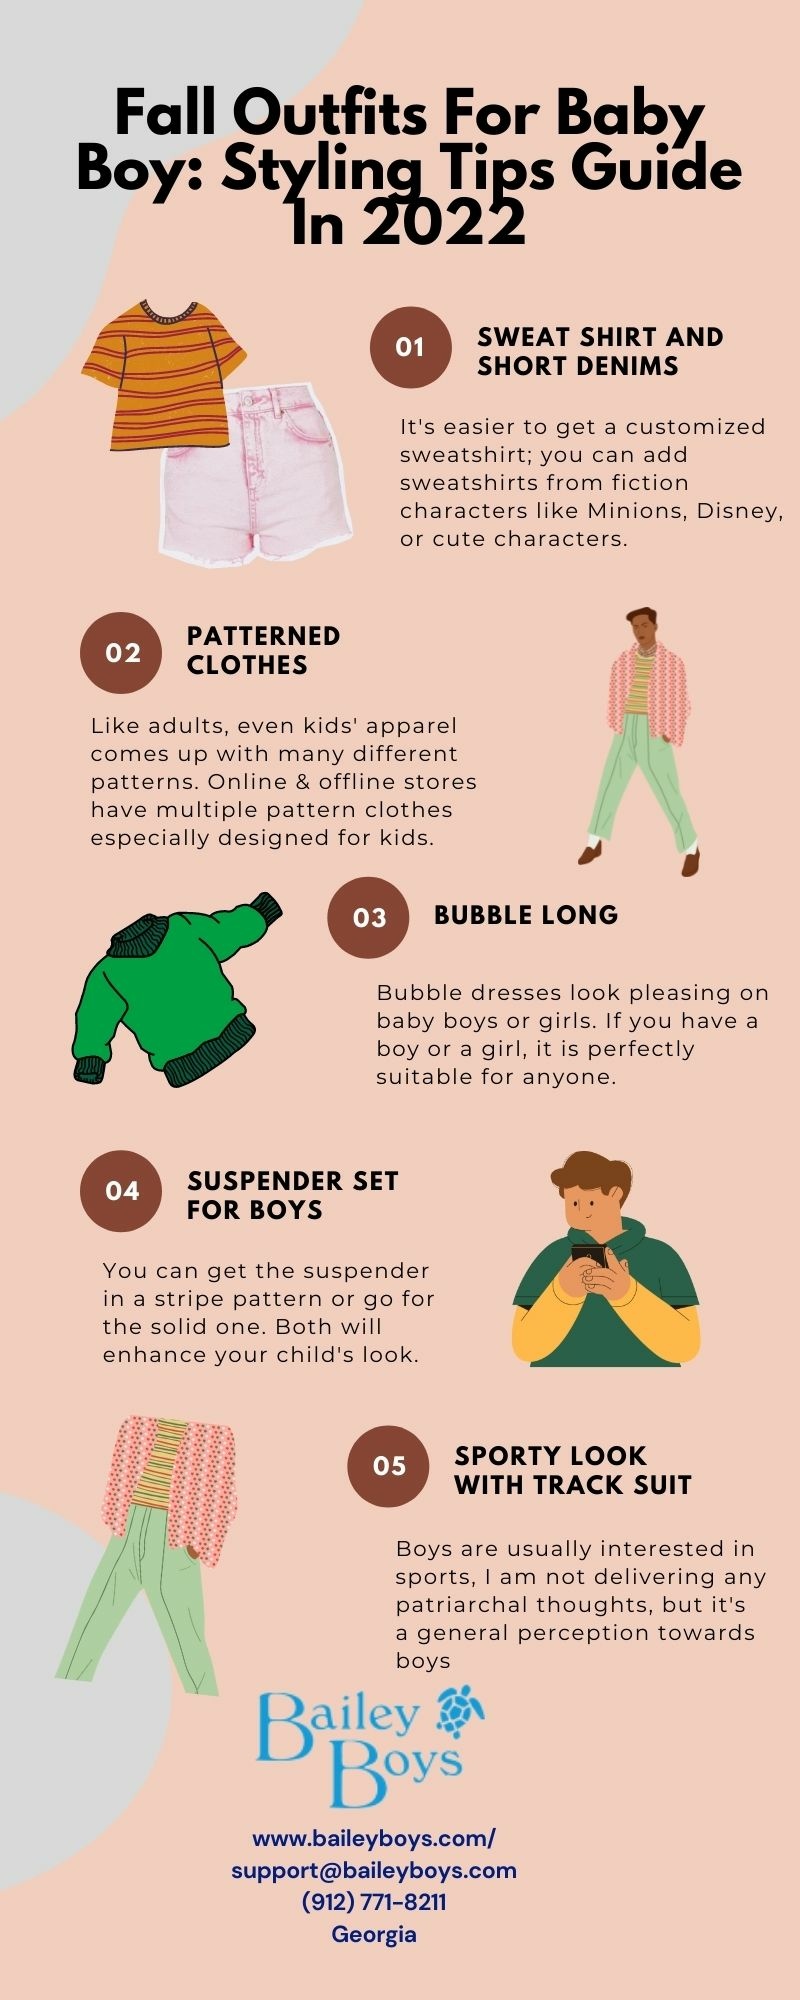 Bailey Boys on Gab: 'Fall Outfits For Baby Boy Styling Tips Guide In 2…' - Gab Social